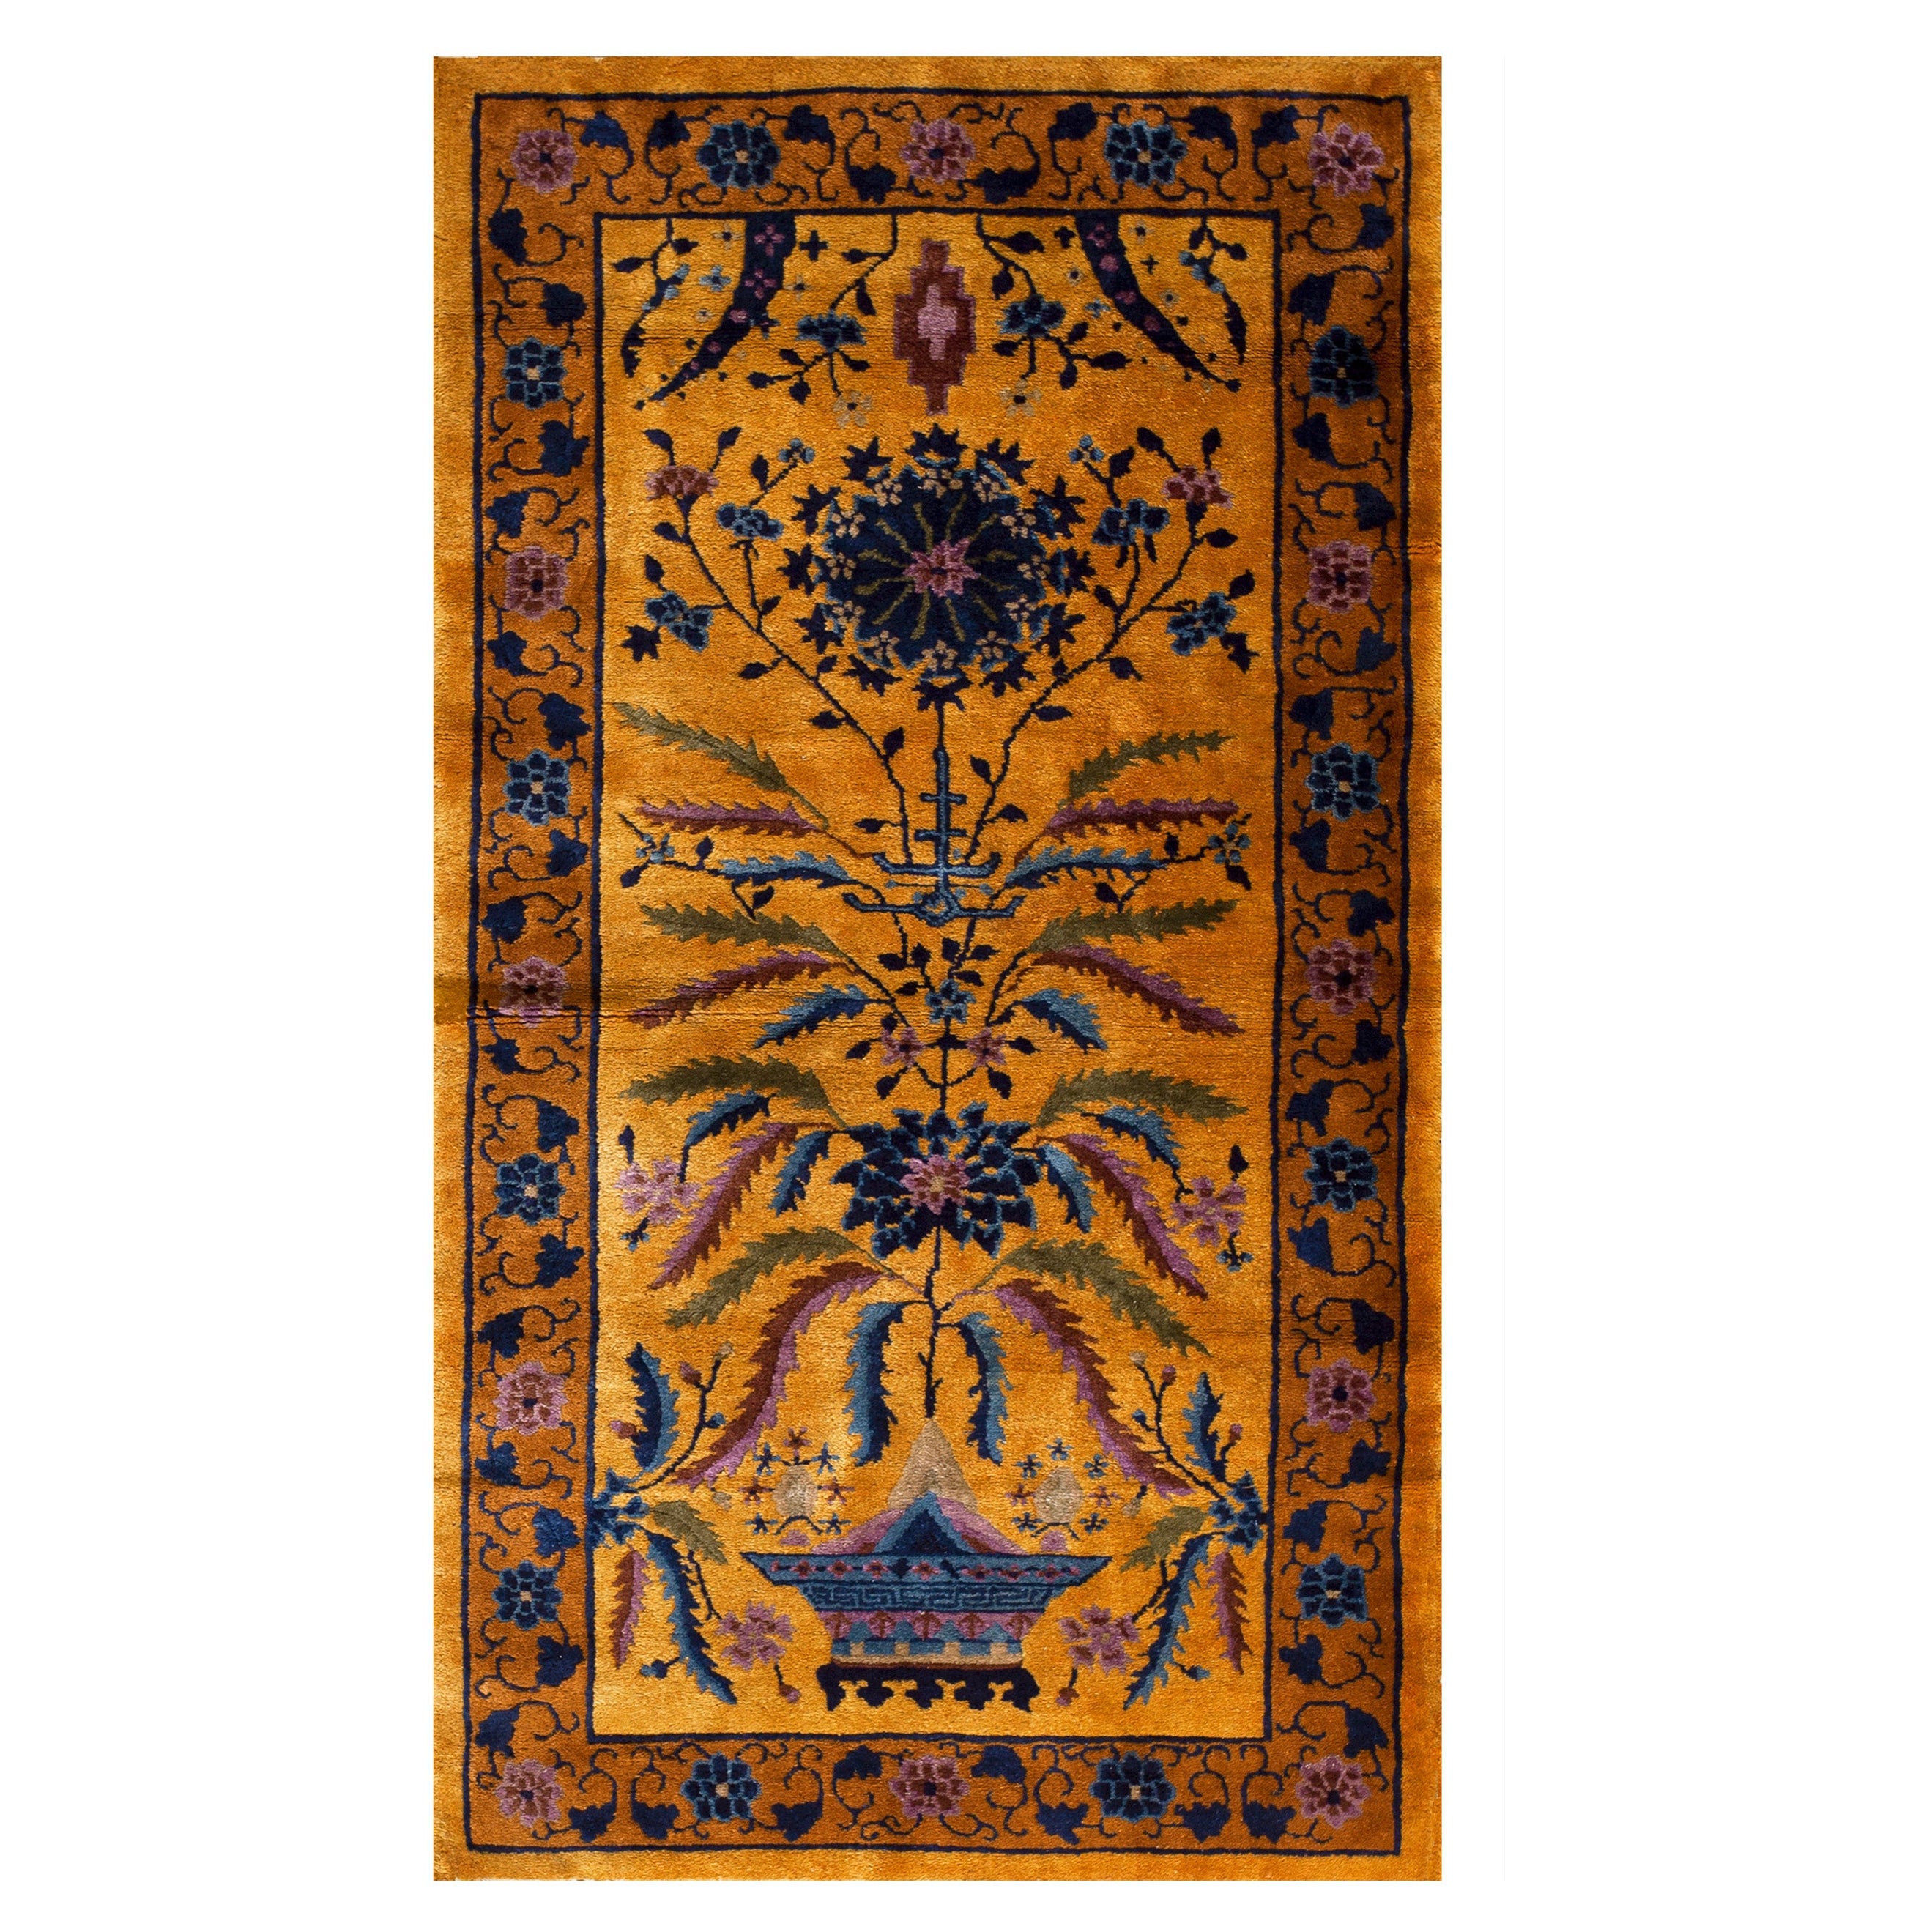 1920s Chinese Art Deco Carpet ( 3'' x 5'6'' - 92 x 167 ) For Sale